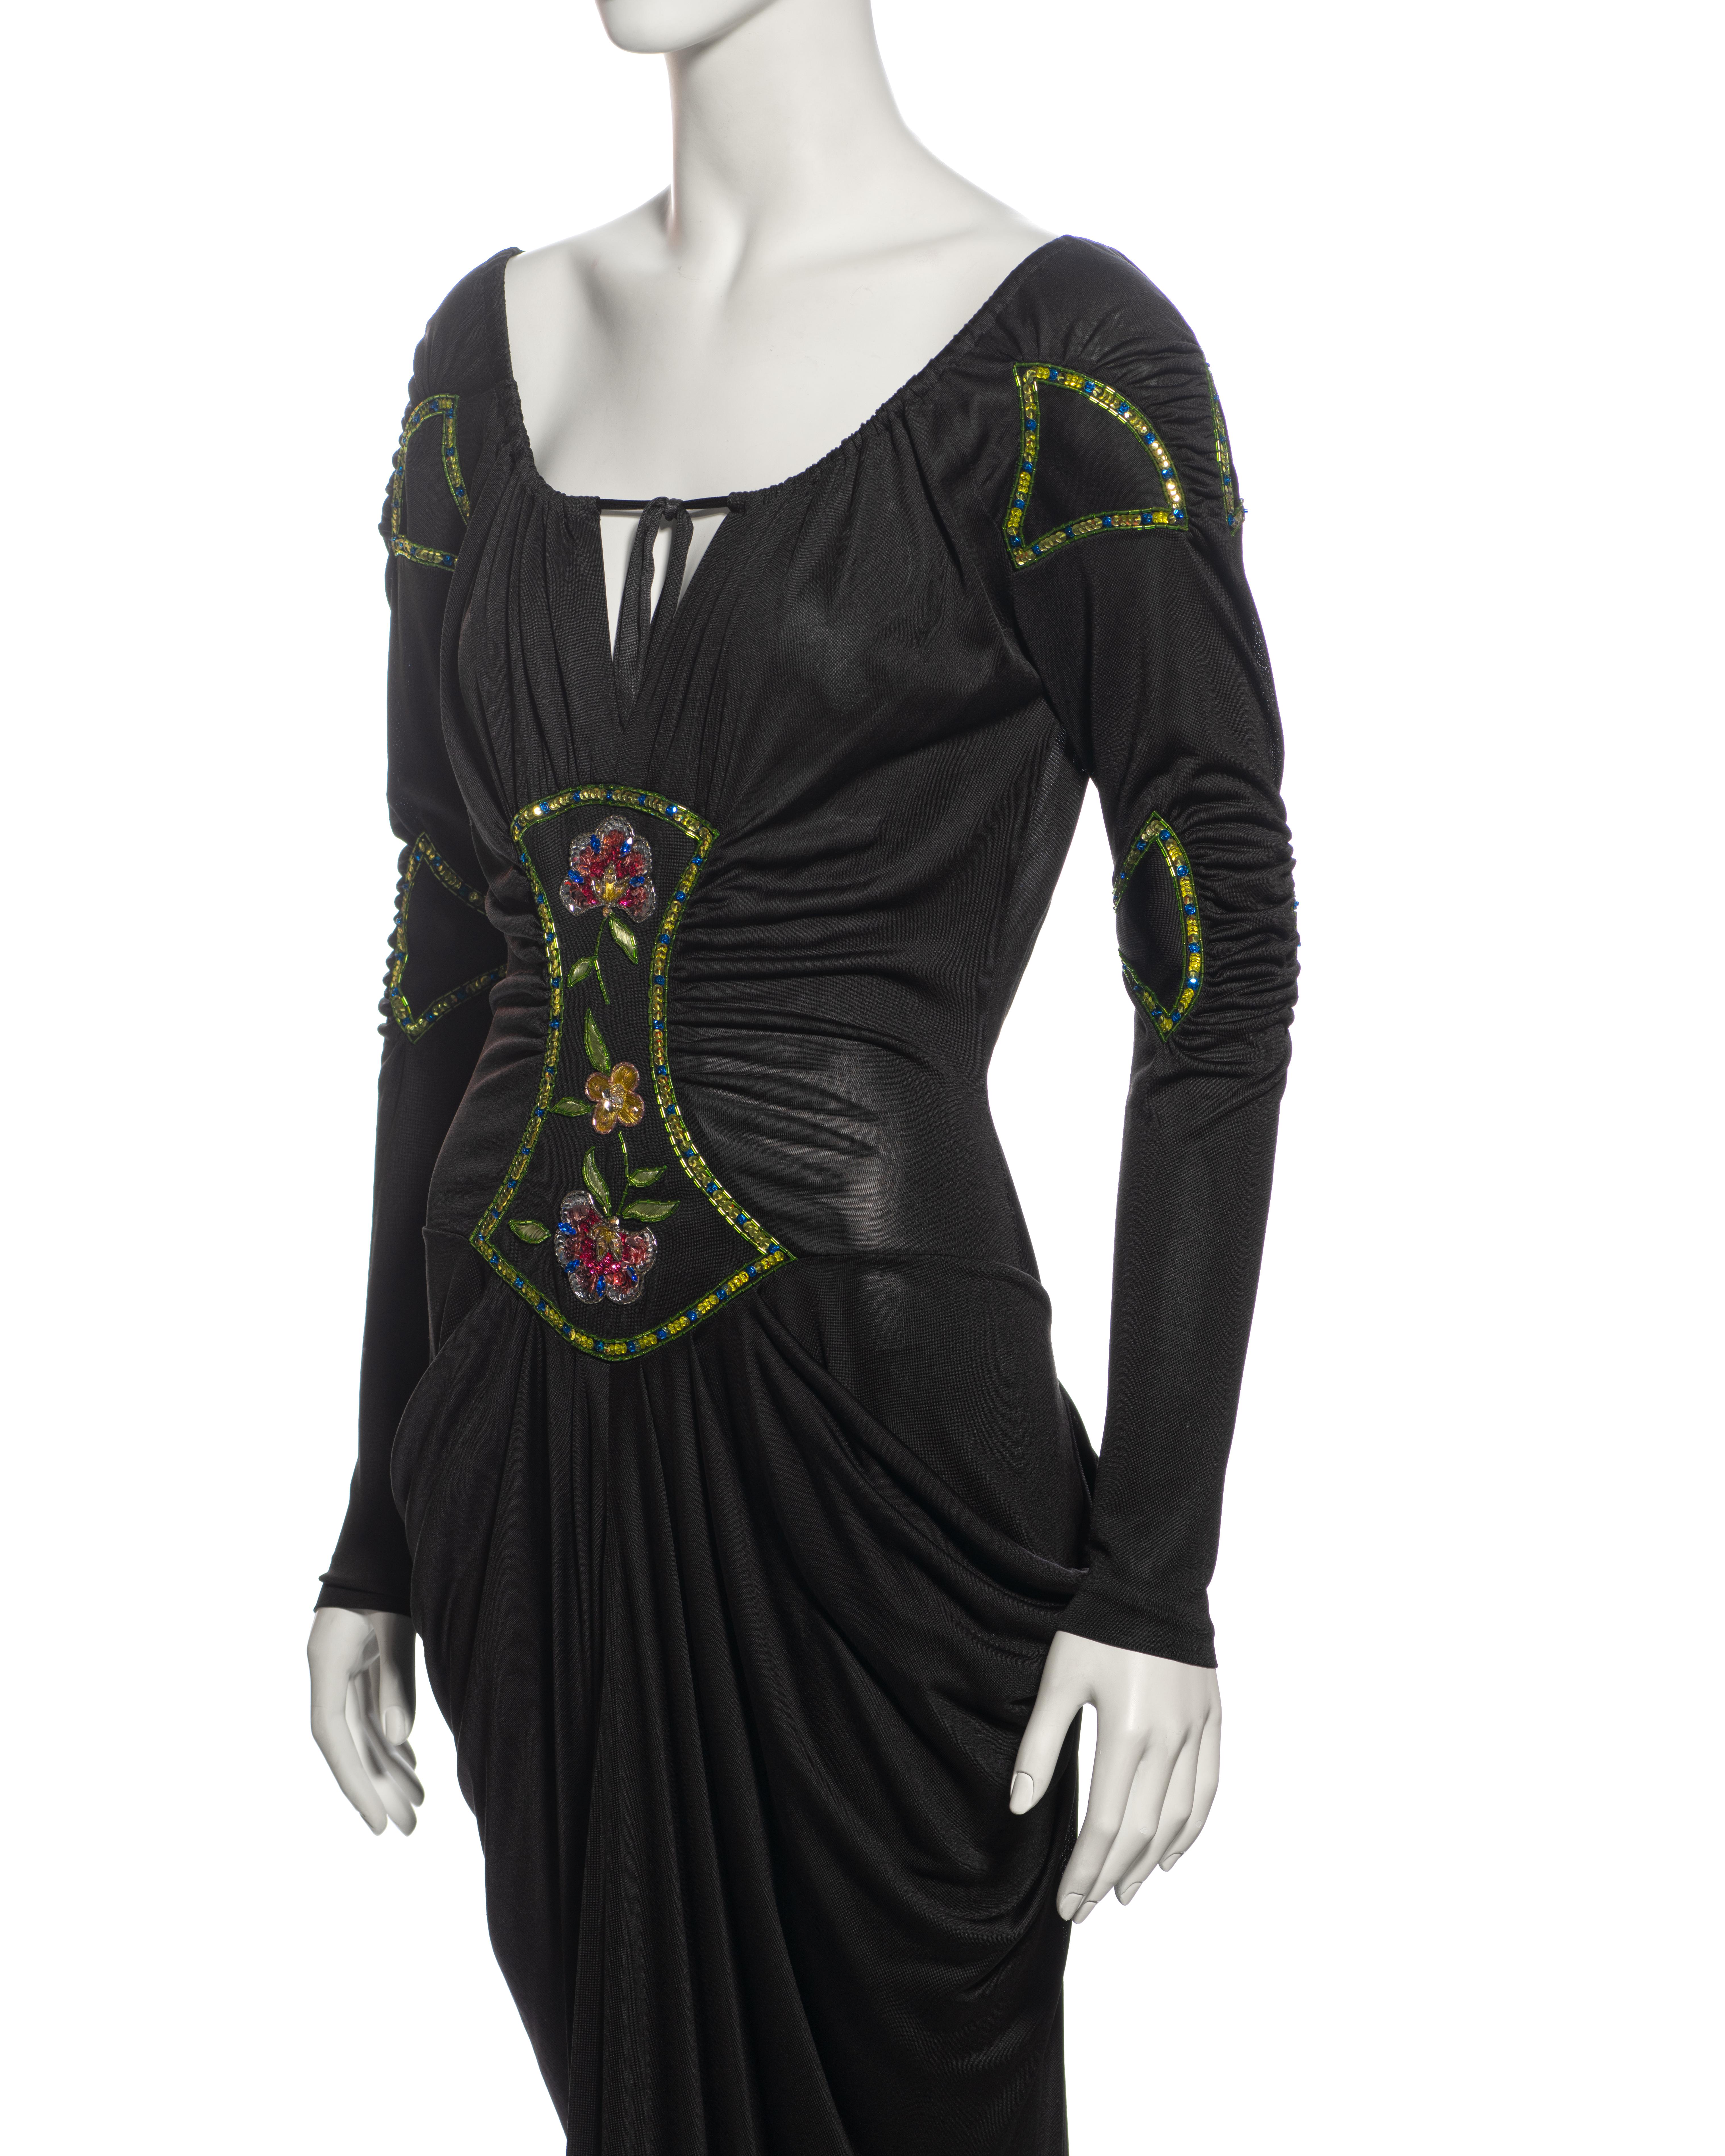 Christian Dior by John Galliano Black Viscose Embellished Draped Dress, ss 2002 For Sale 13